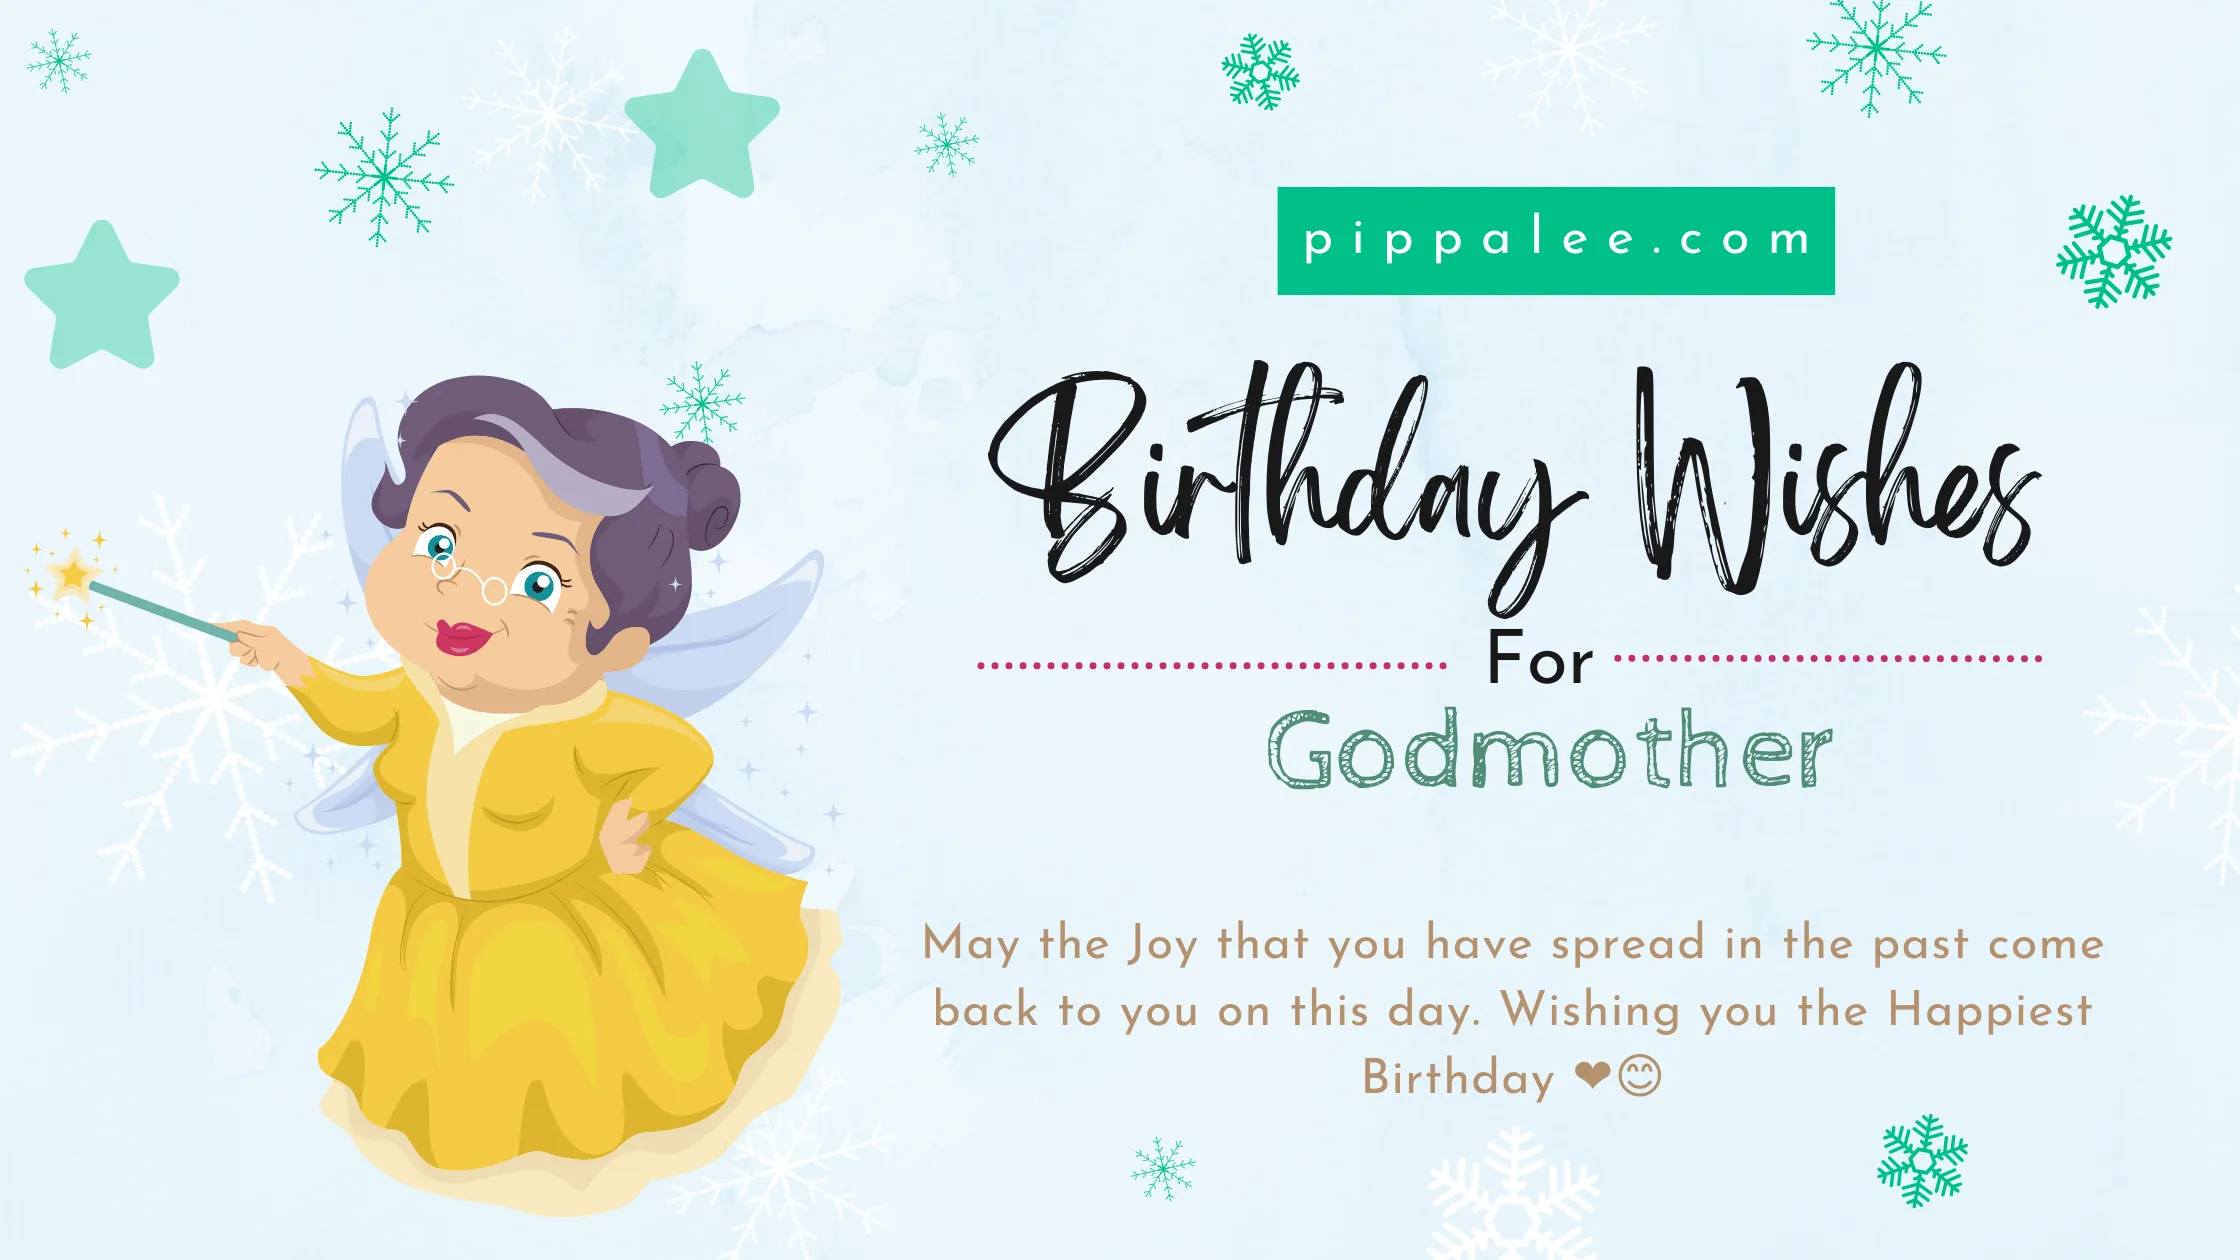 Birthday Wishes For Godmother - Wishes & Messages